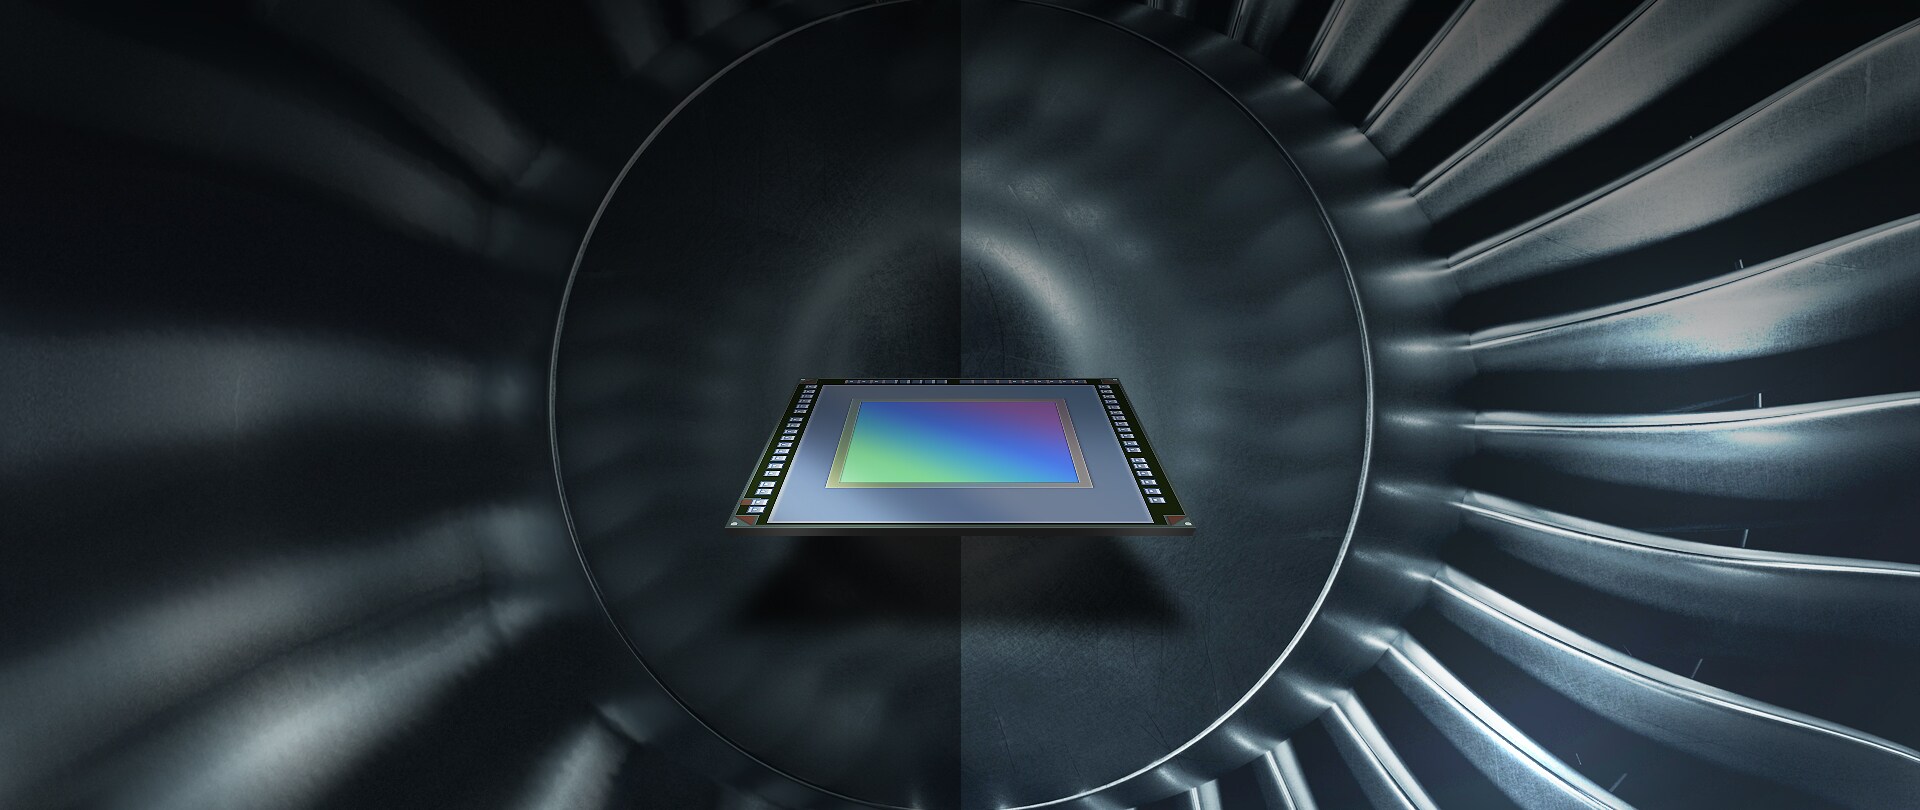 ISOCELL Vizion Global Shutter chip showcases Samsung Semiconductor's technical prowess, enabling distortion-free capture of fast-moving images like engine wings.